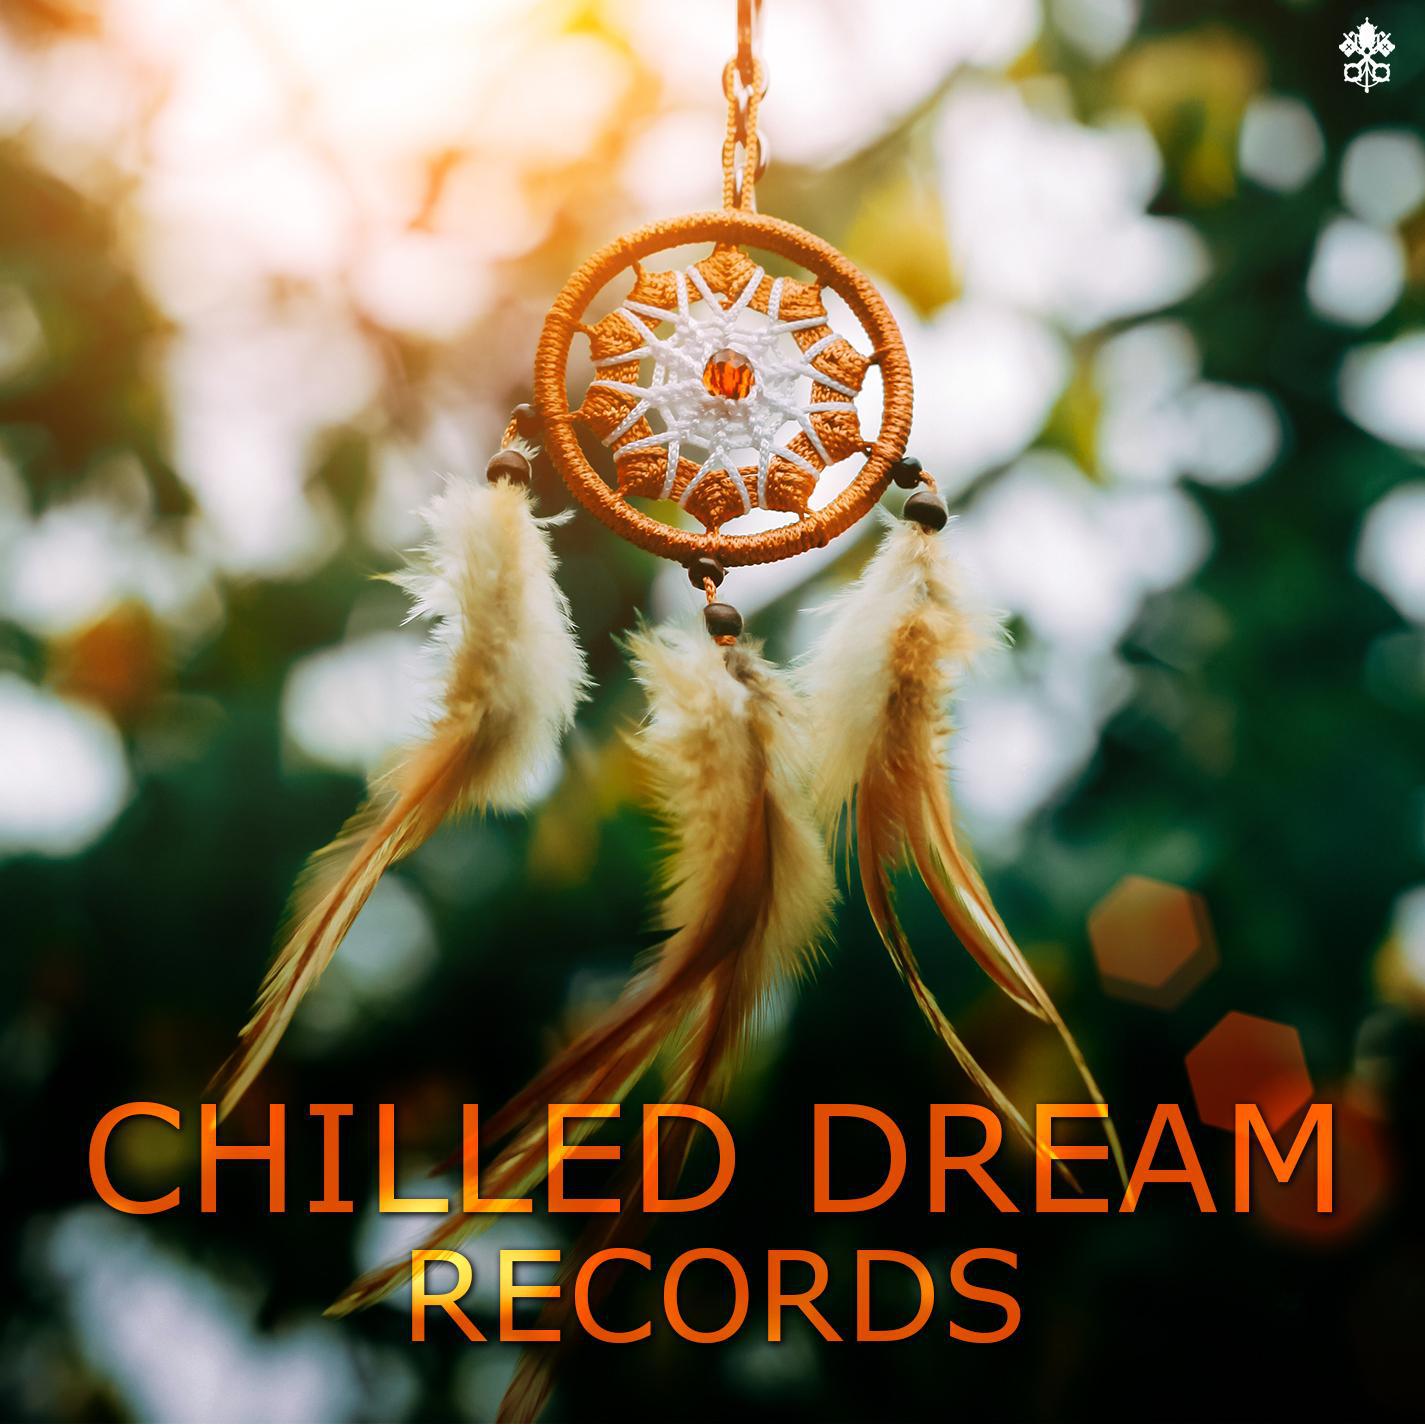 Chilled Dream Records